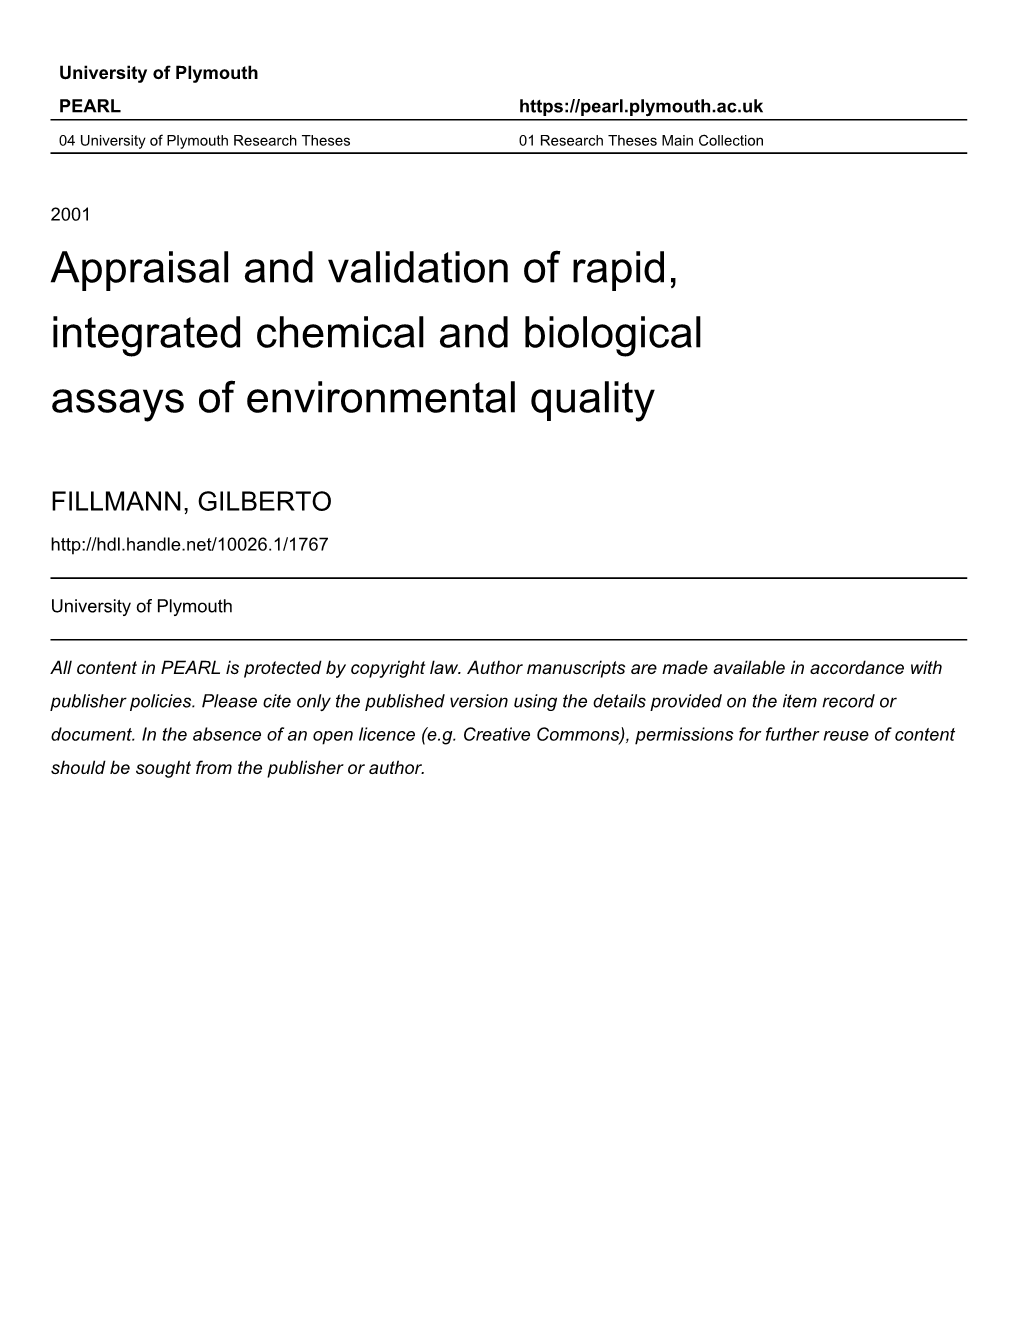 Appraisal and Validation of Rapid, Integrated Chemical and Biological Assays of Environmental Quality